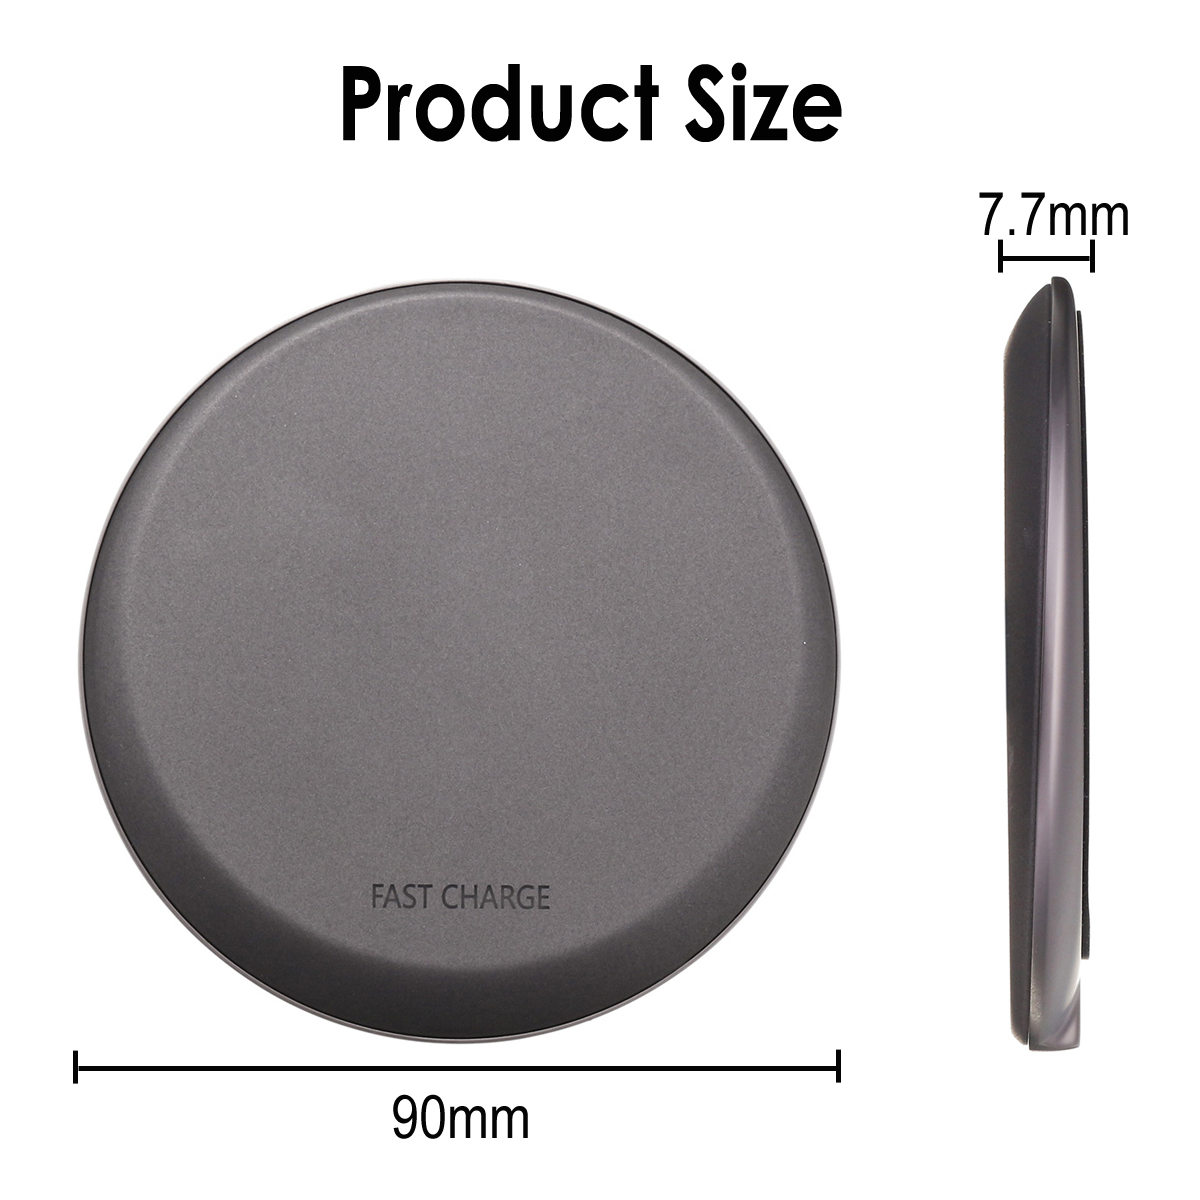 Bakeey-10W-Qi-Wireless-Charger-Fast-Charging-Pad-For-iphone-X-88Plus-Samsung-S9-S8-S7-1300175-10